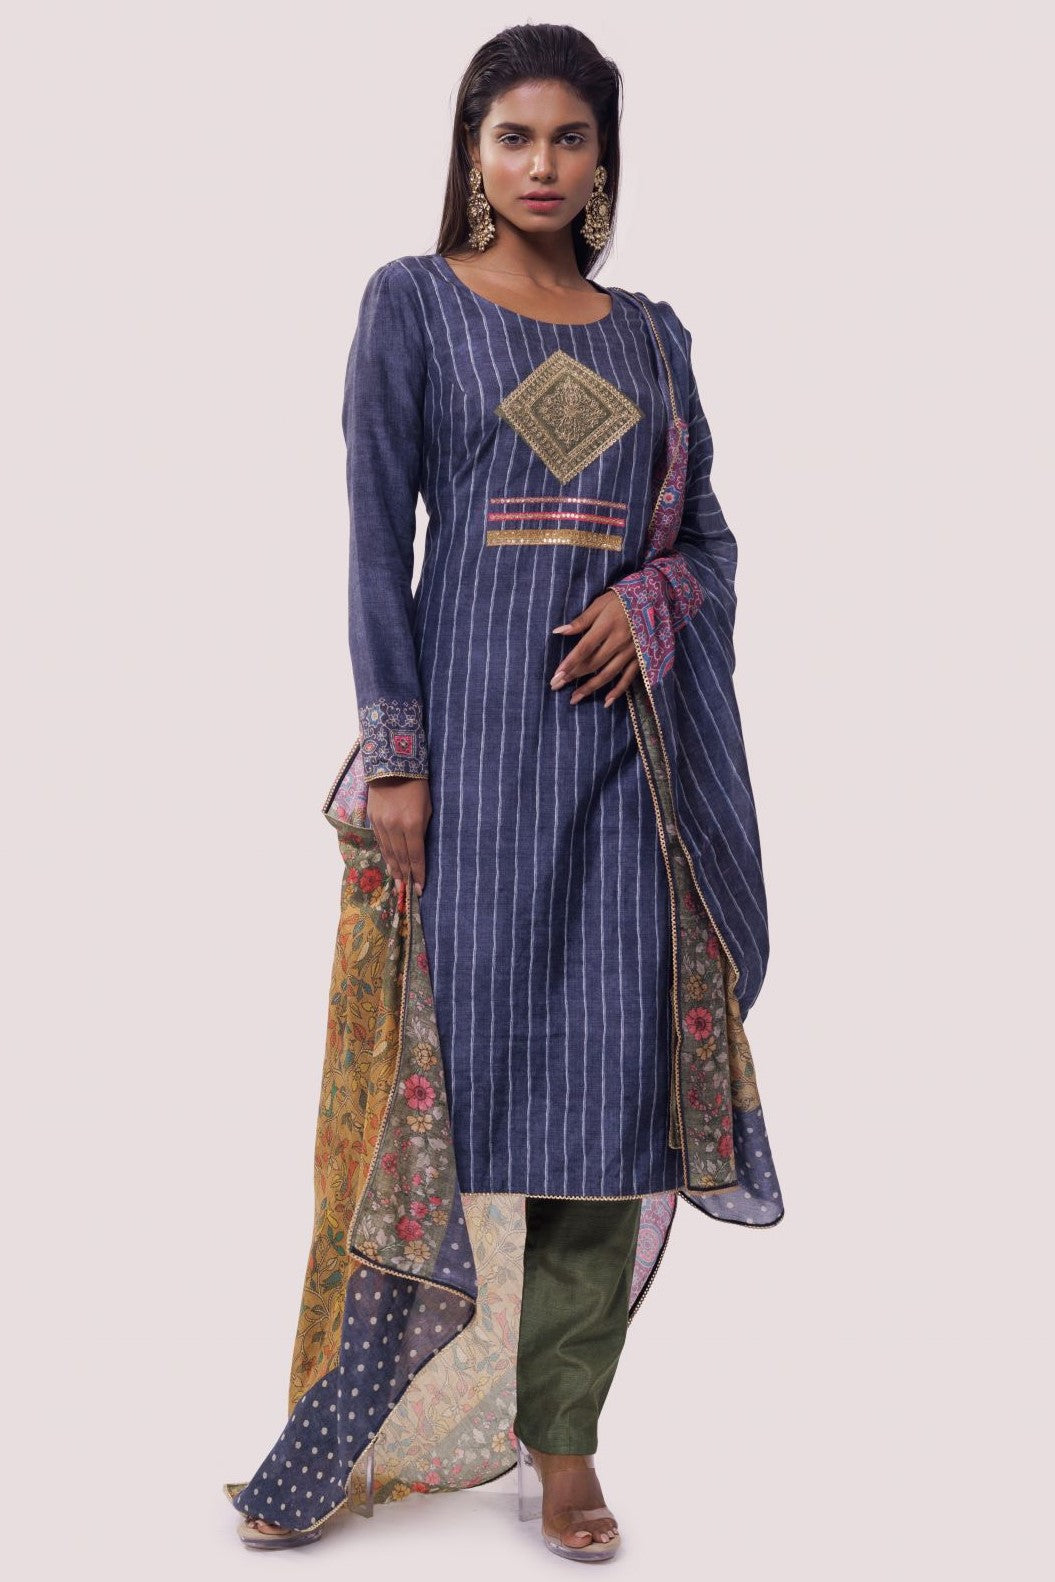 Shop blue striped chanderi suit in USA with green pants. Dazzle on weddings and special occasions with exquisite Indian designer dresses, sharara suits, Anarkali suits, wedding lehengas from Pure Elegance Indian fashion store in USA.-full view